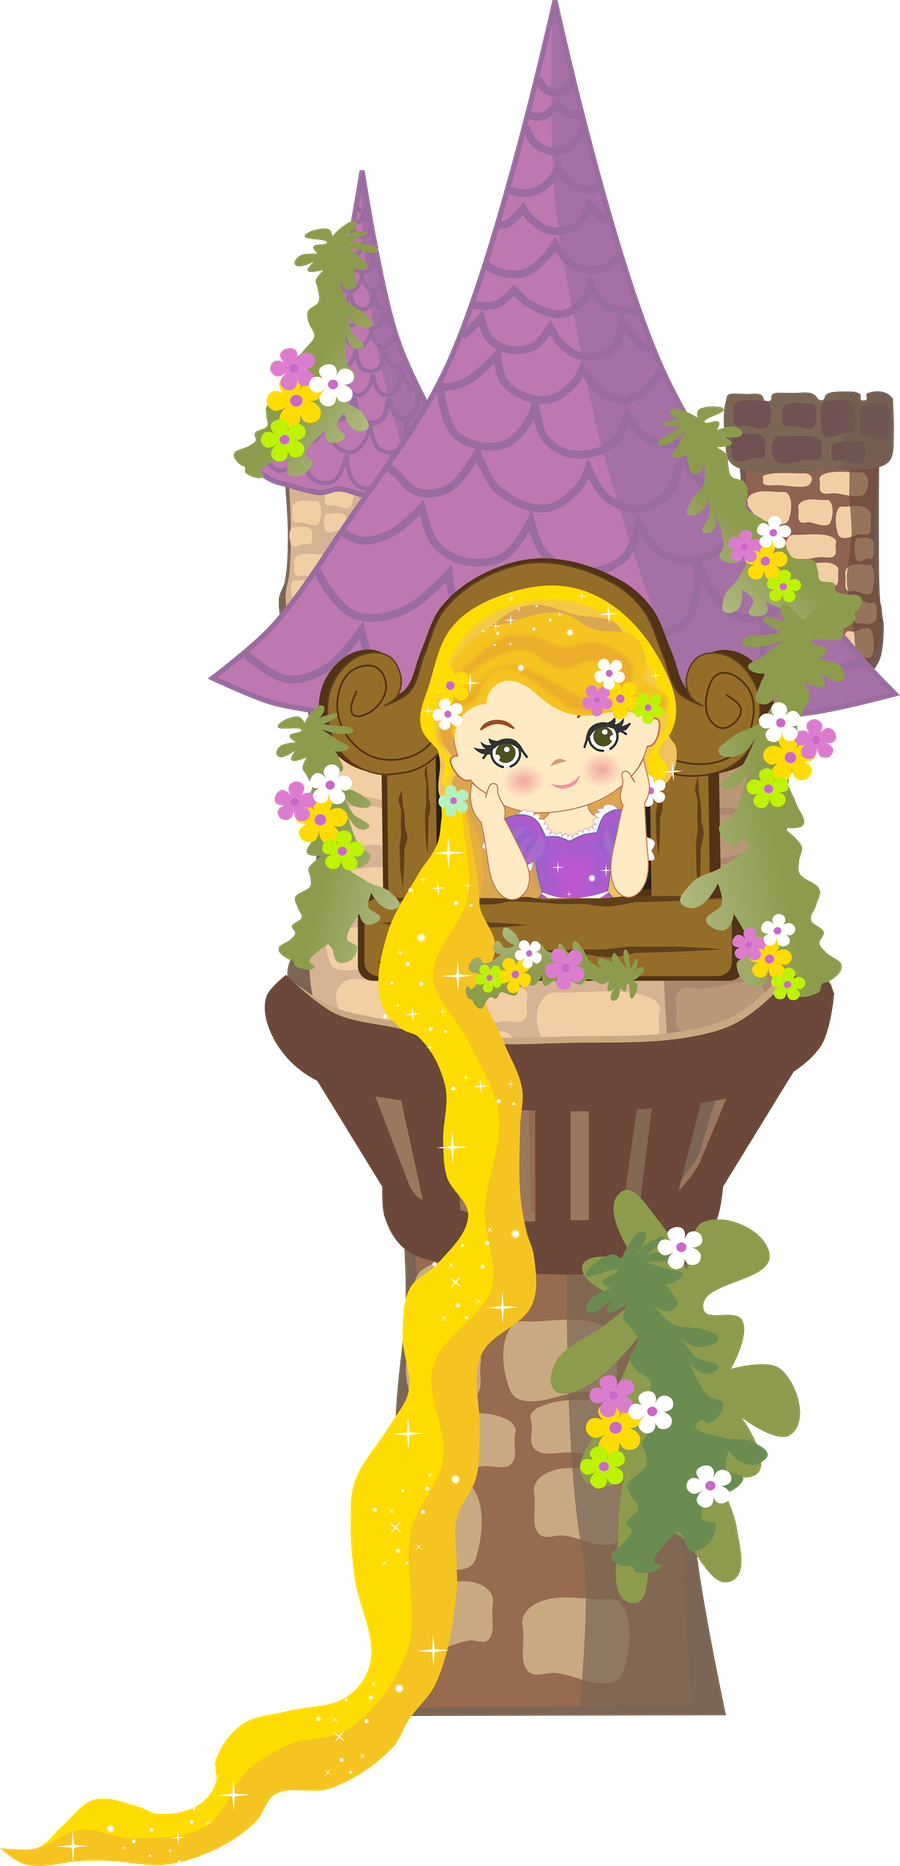 Fairytale Tower Princess Illustration PNG